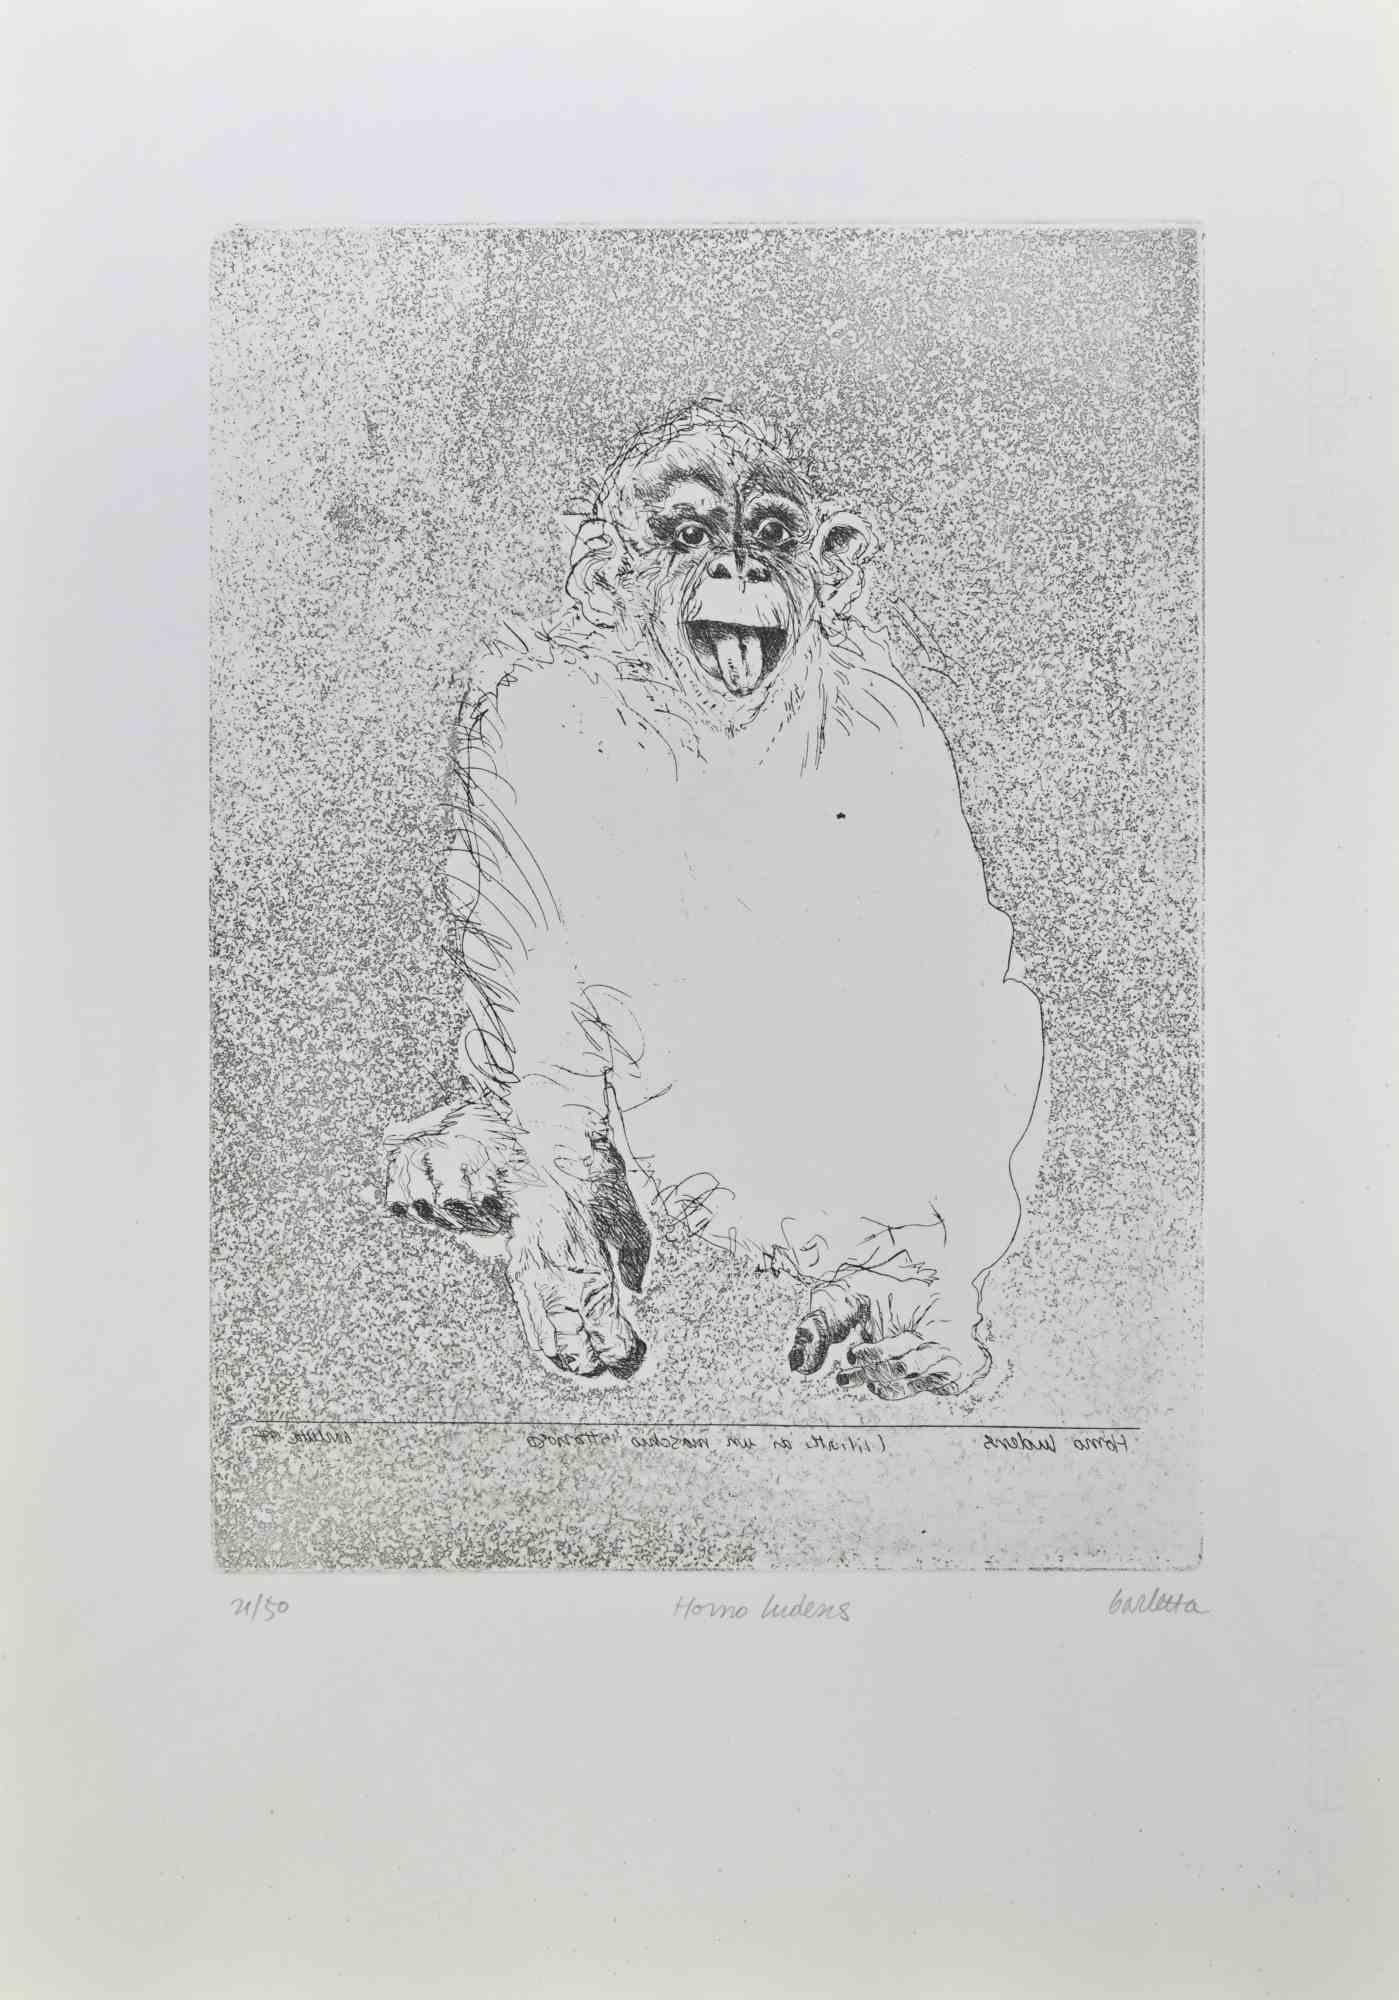 Homo Ludens is a etching realized by Sergio Barletta in 1991.

Hand-signed  lower right in pencil, and titled lower center "Homo Ludens". Numbered lower left, from the edition of 50 prints.

Good conditions.

Sergio Barletta (1934) is an Italian